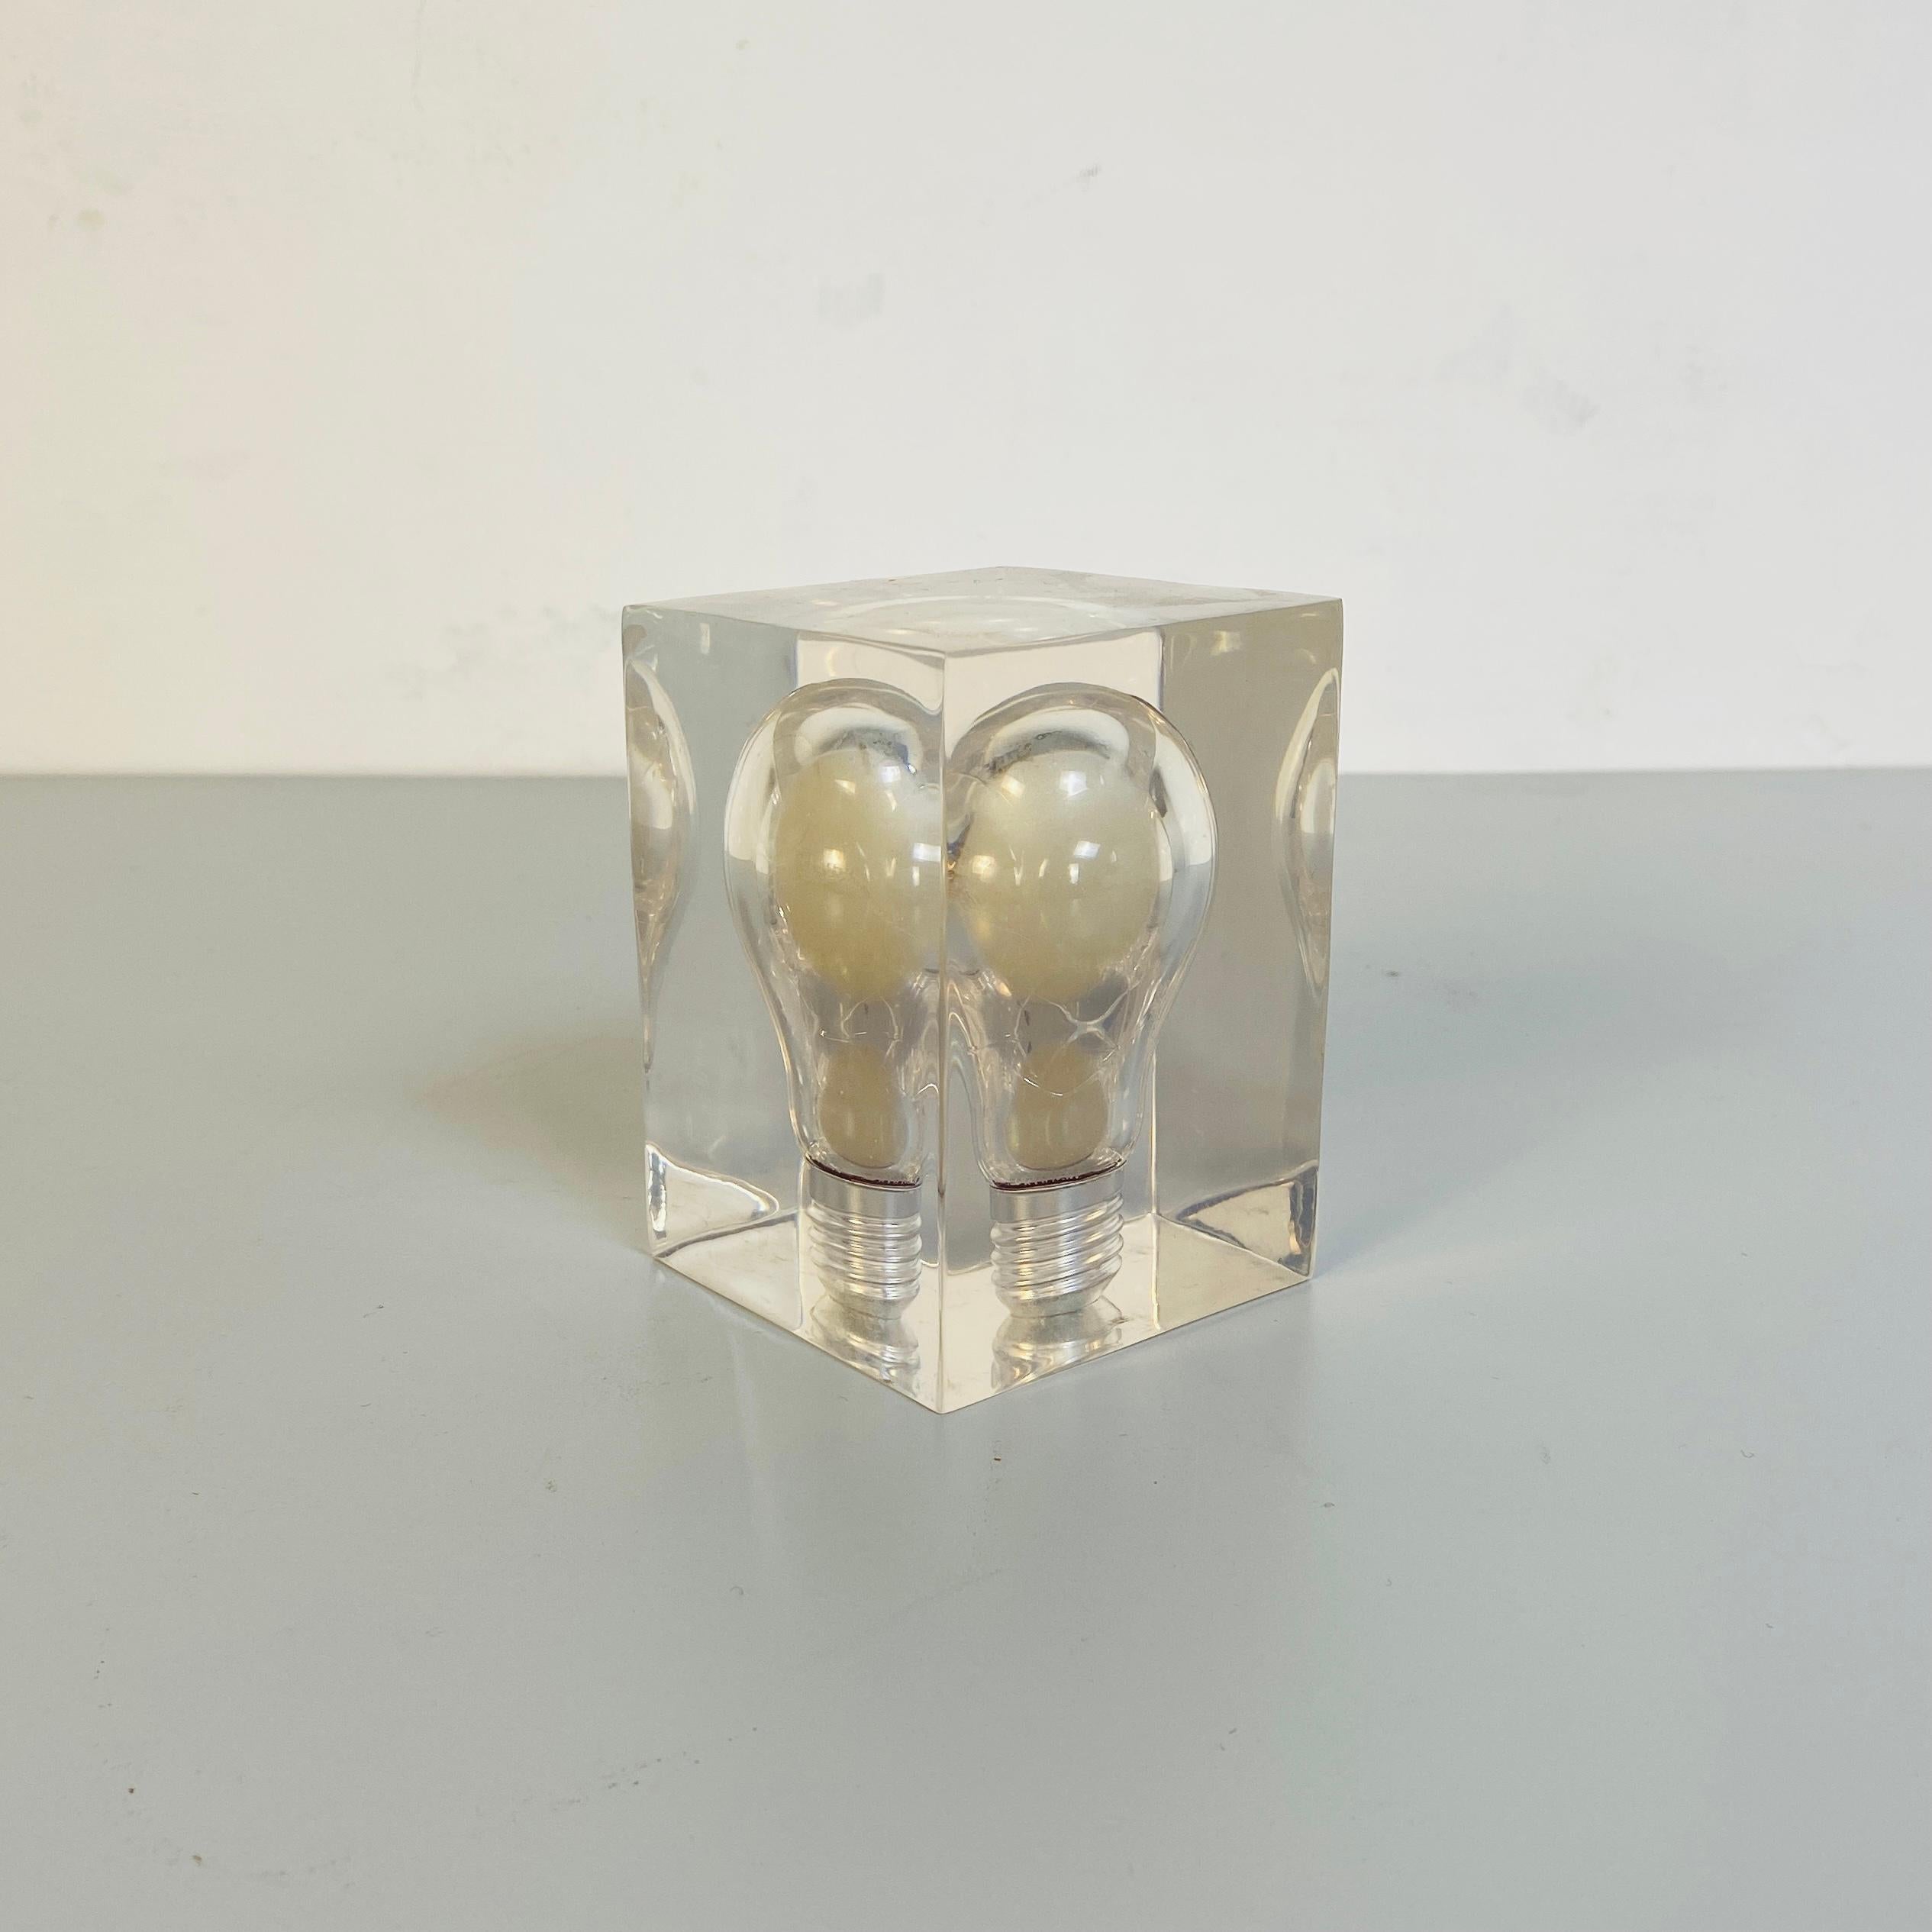 Late 20th Century French Mid-Century Modern Lucite Sculpture by Pierre Giraudon, 1970s For Sale